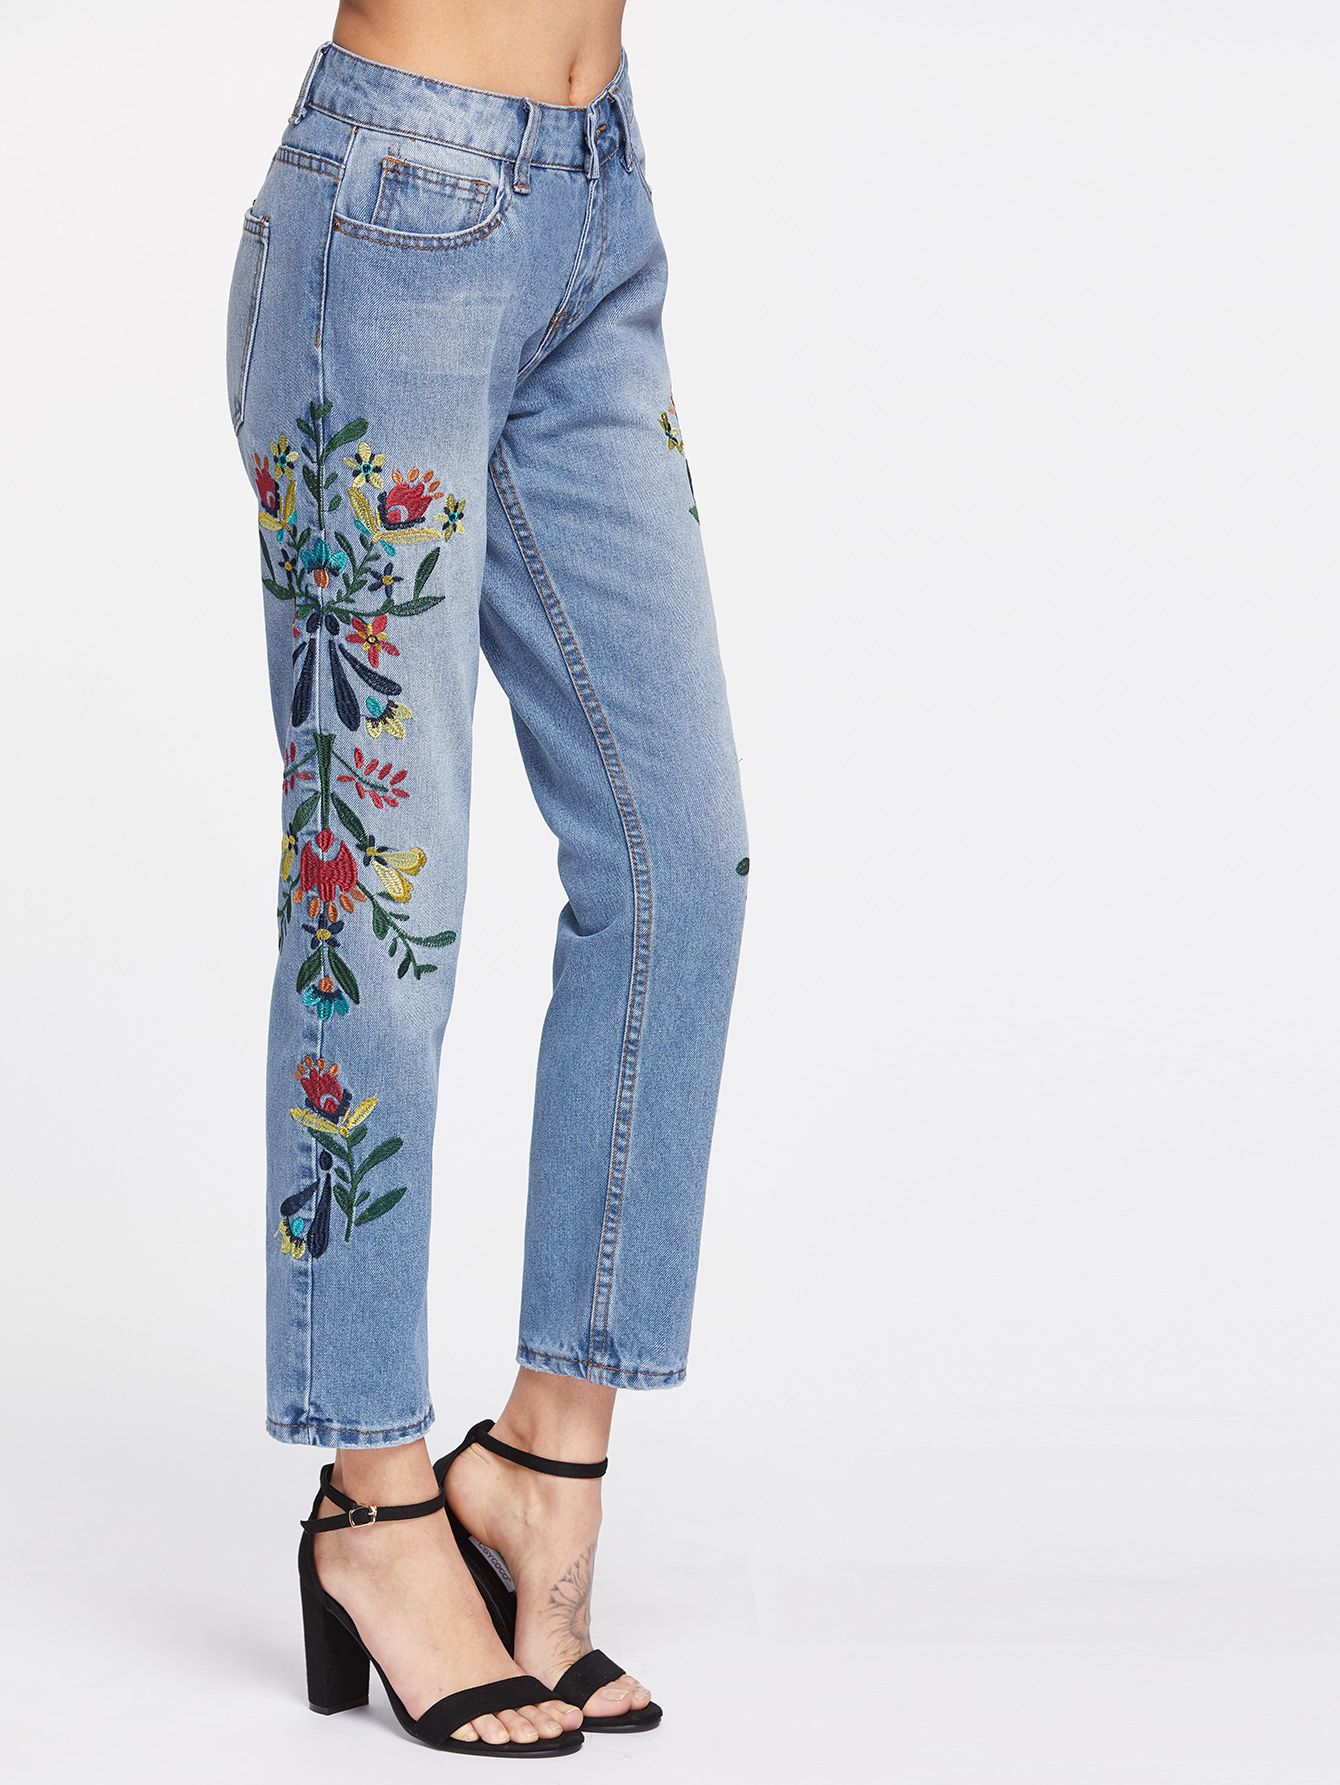 High Waist Embroidery Full Length Jeans | SHEIN